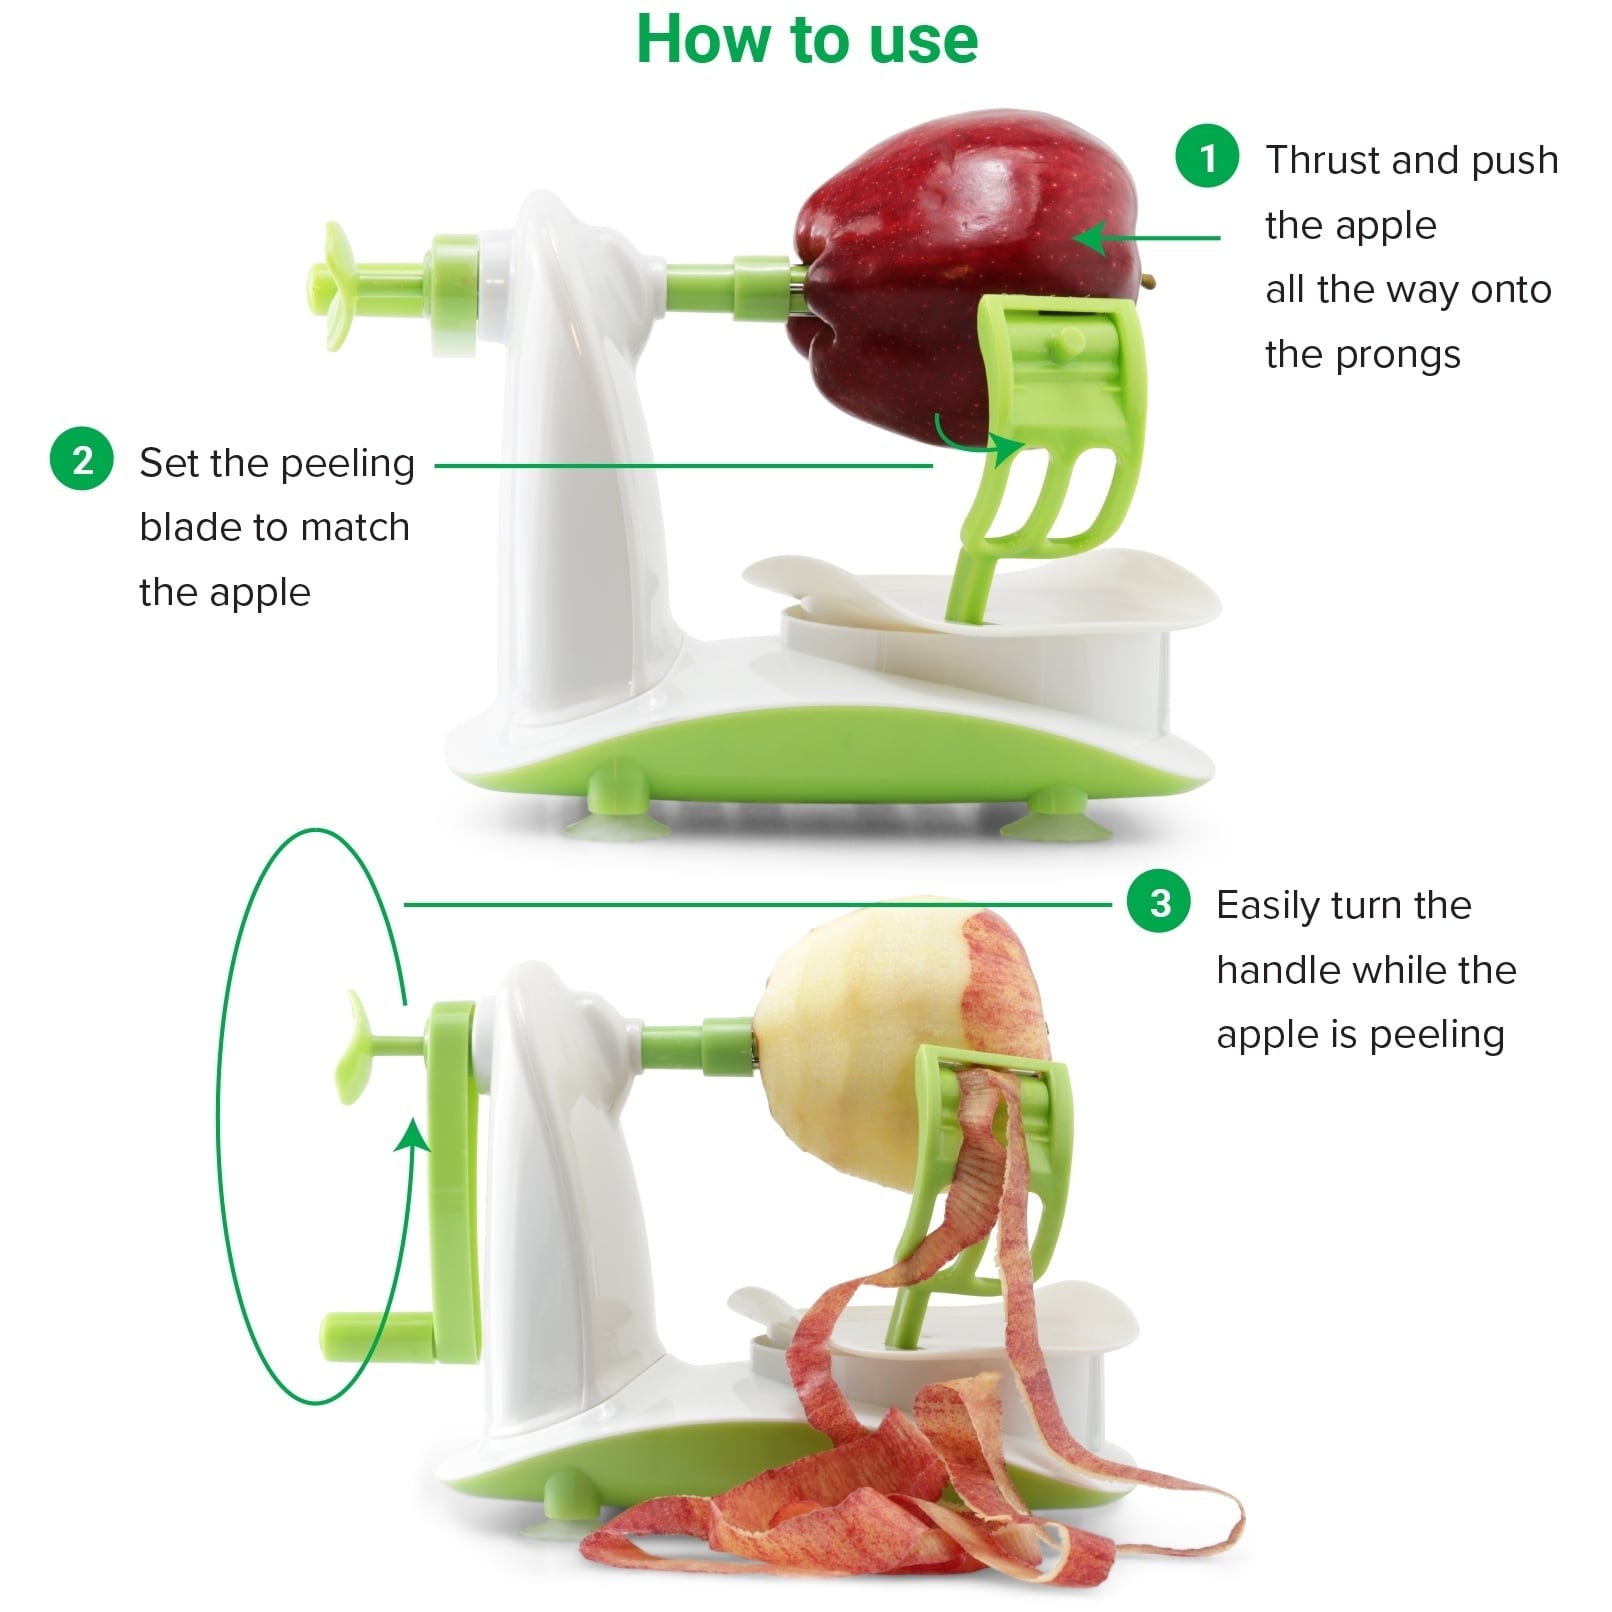 Stainless Steel Apple Corer Tool A Small Multifunctional Apple Corer and Peeler With Peeling and Core Removal Functions Which can Easily Remove Fruit Peels and is Easy to Clean